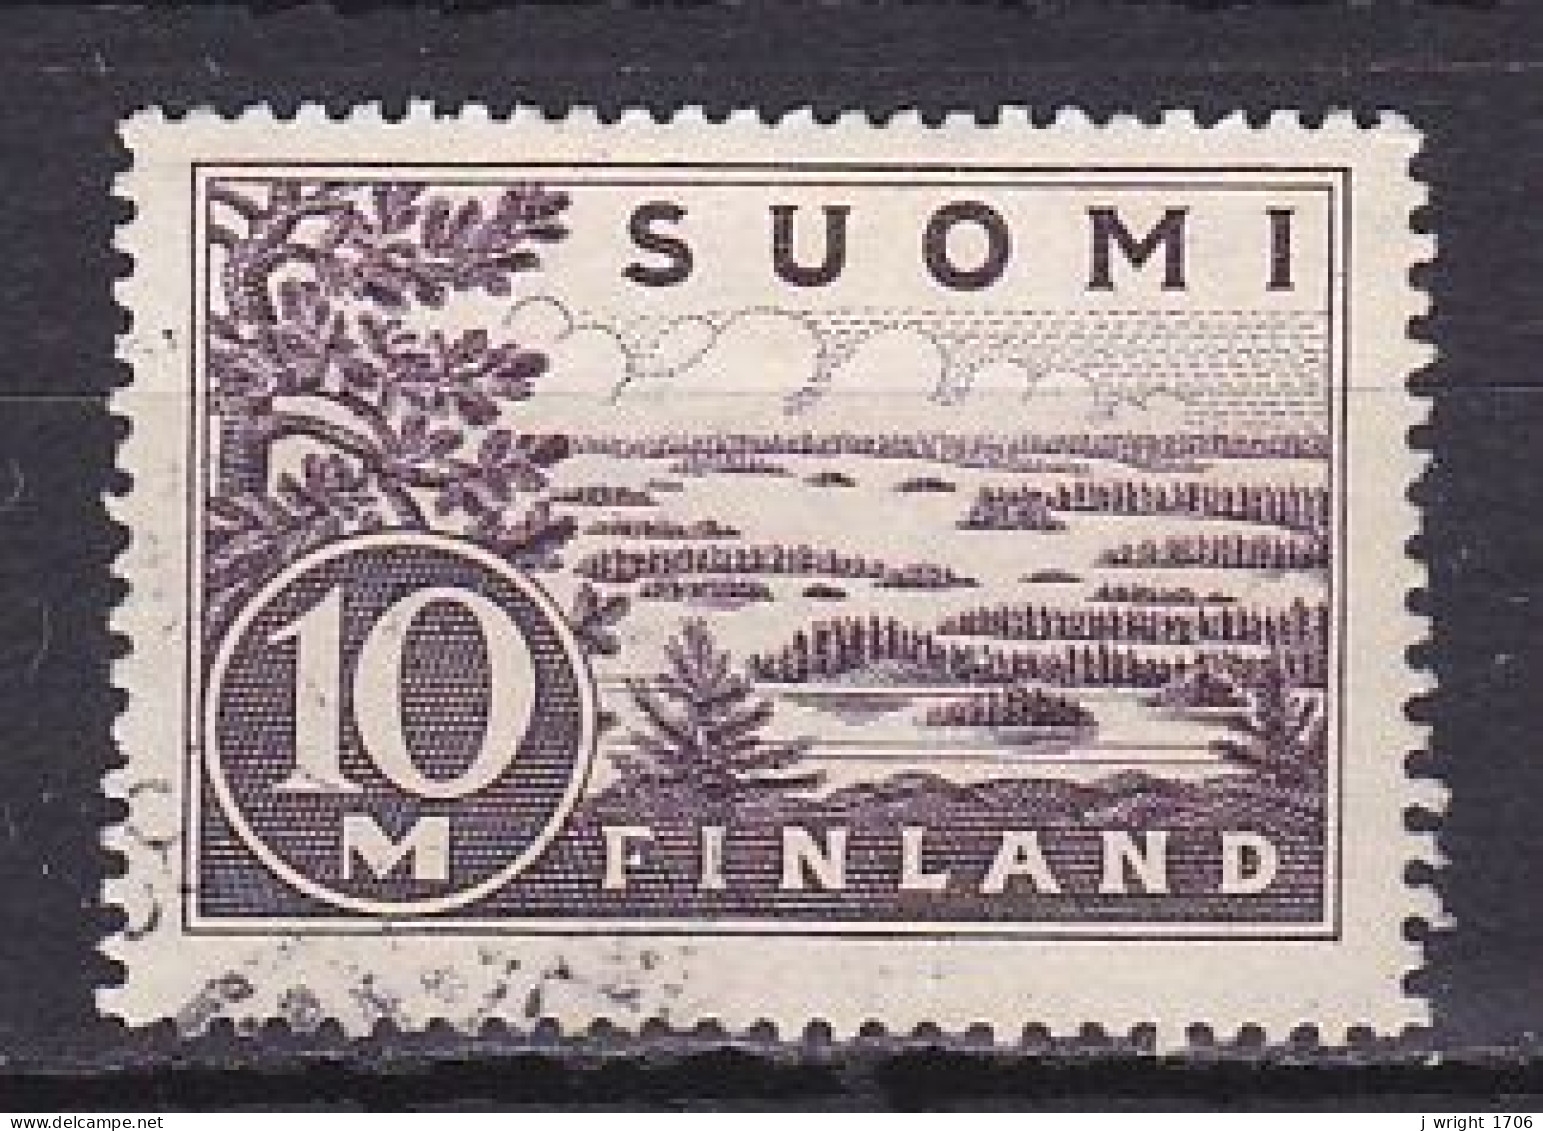 Finland, 1932, Lake Saimaa/Red Violet, 10mk, USED - Used Stamps